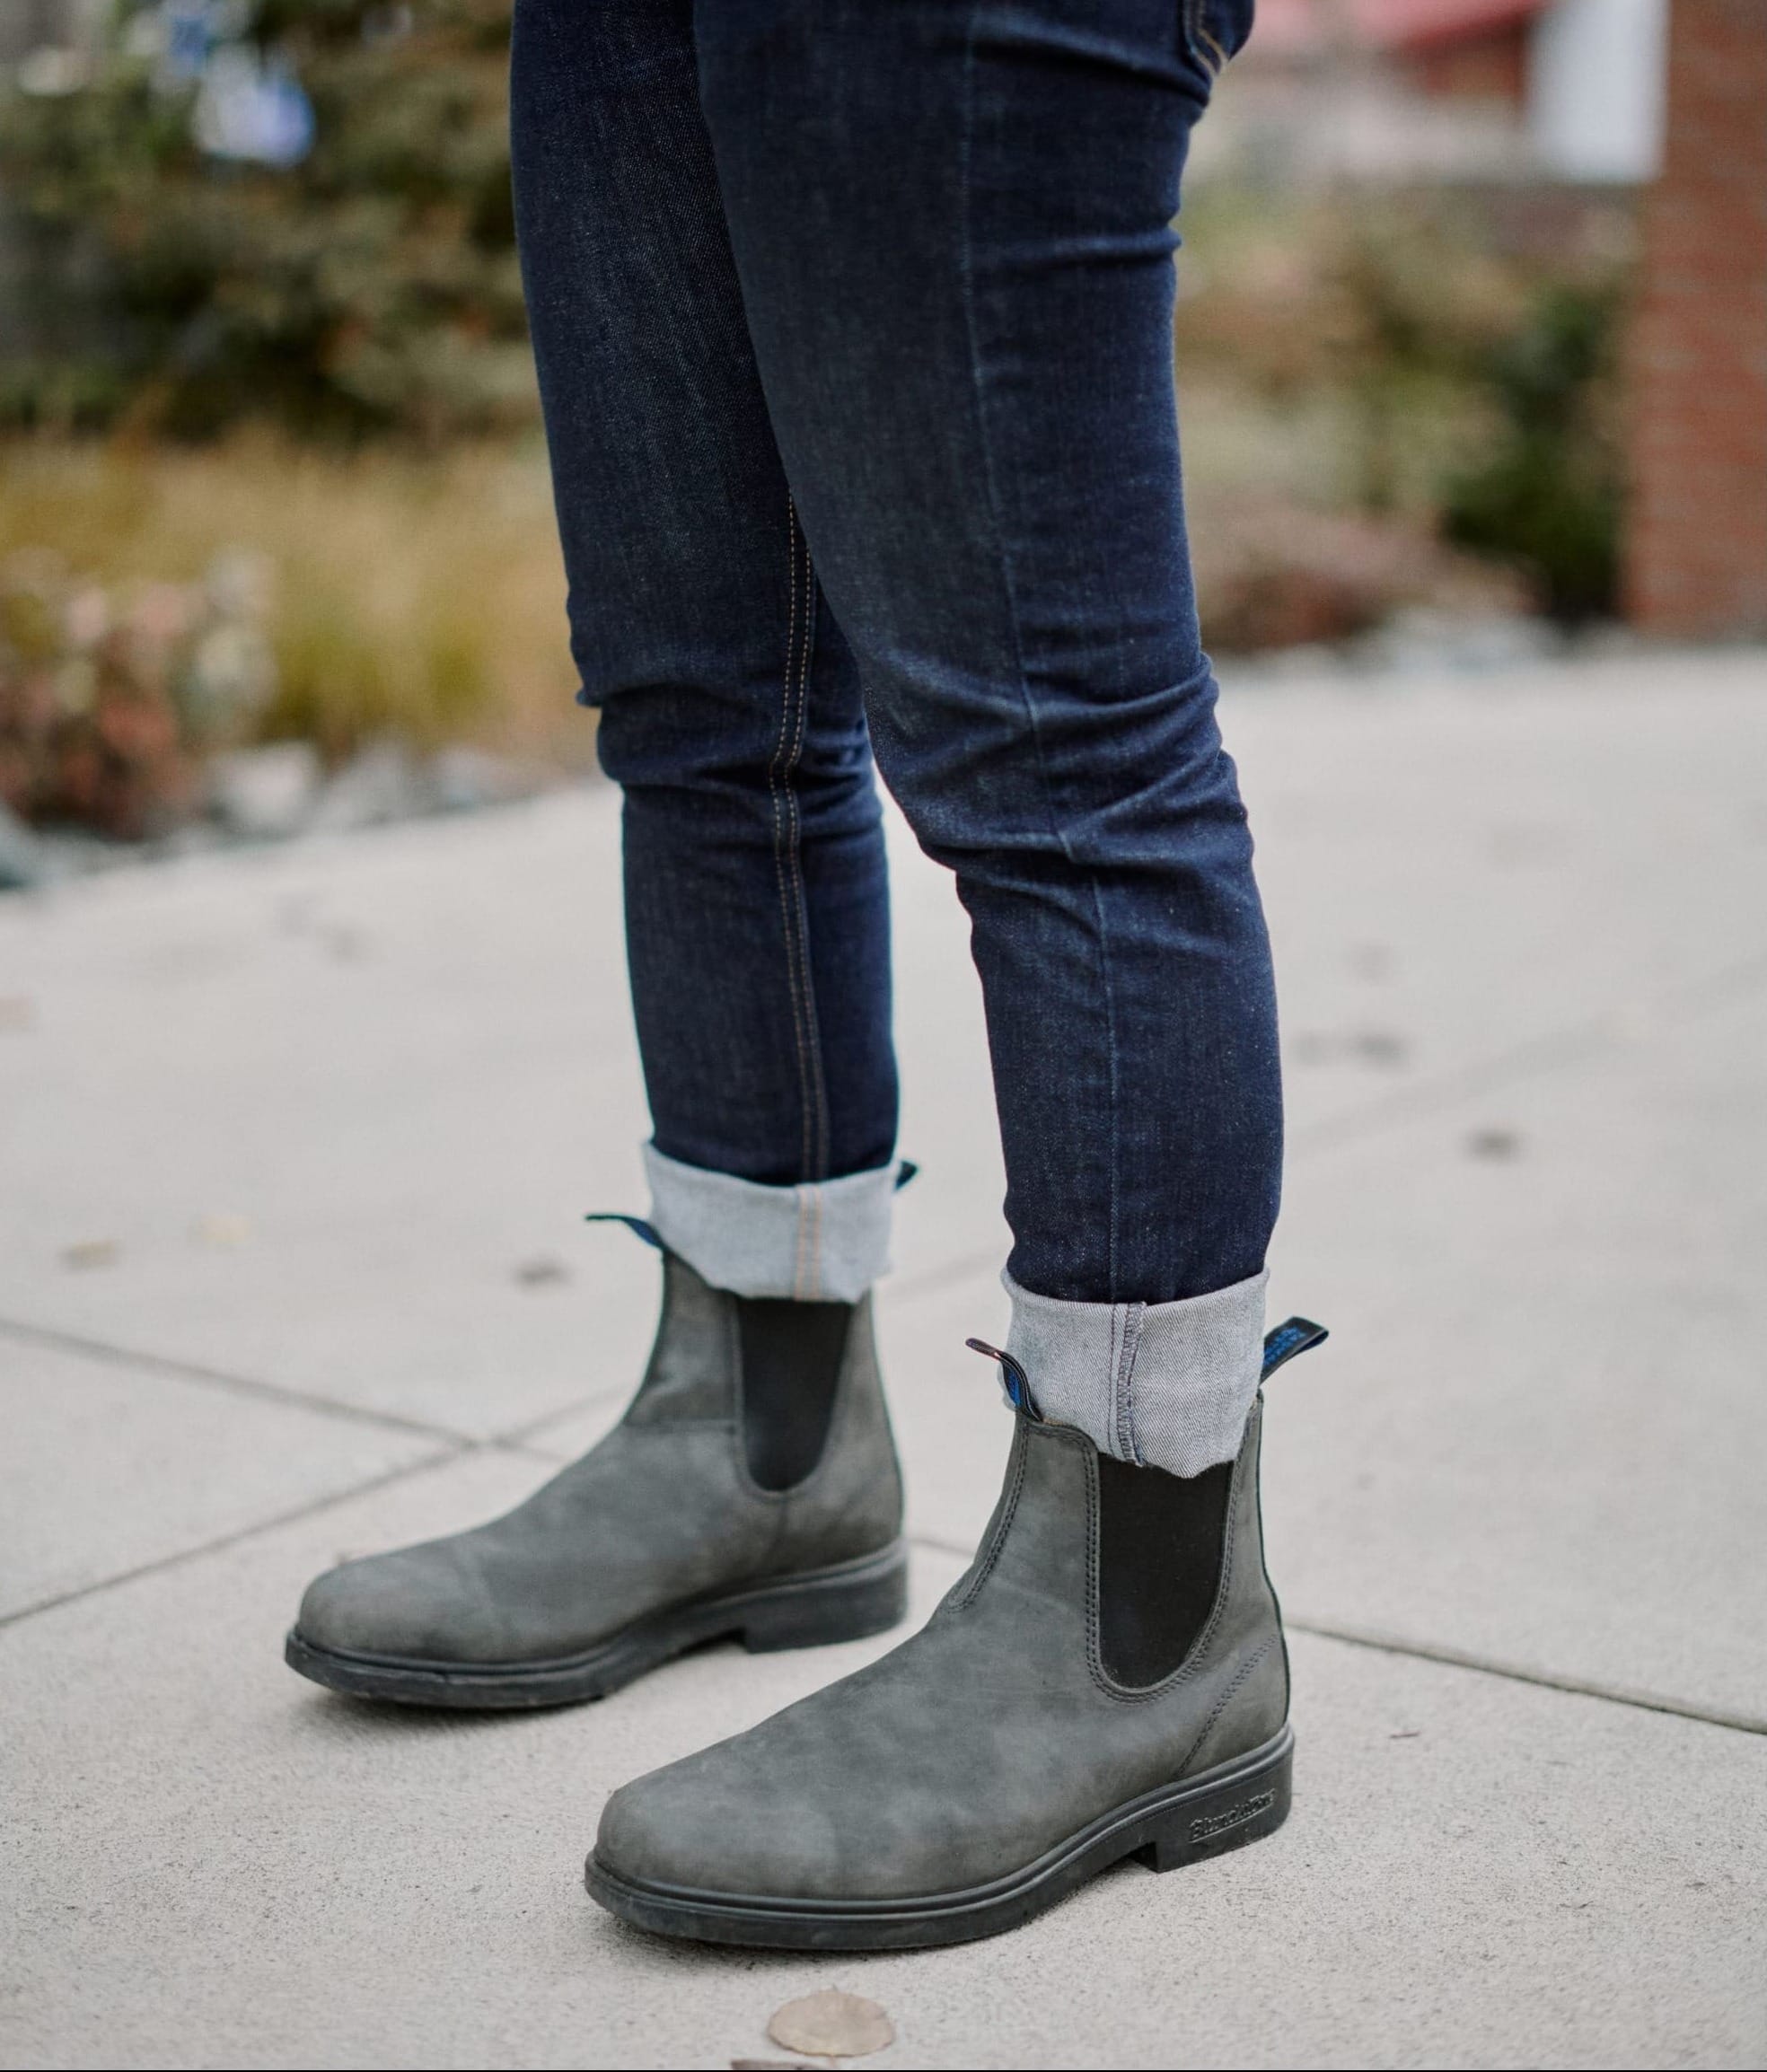 A Review Of The Blundstone 1308 Dress Boots